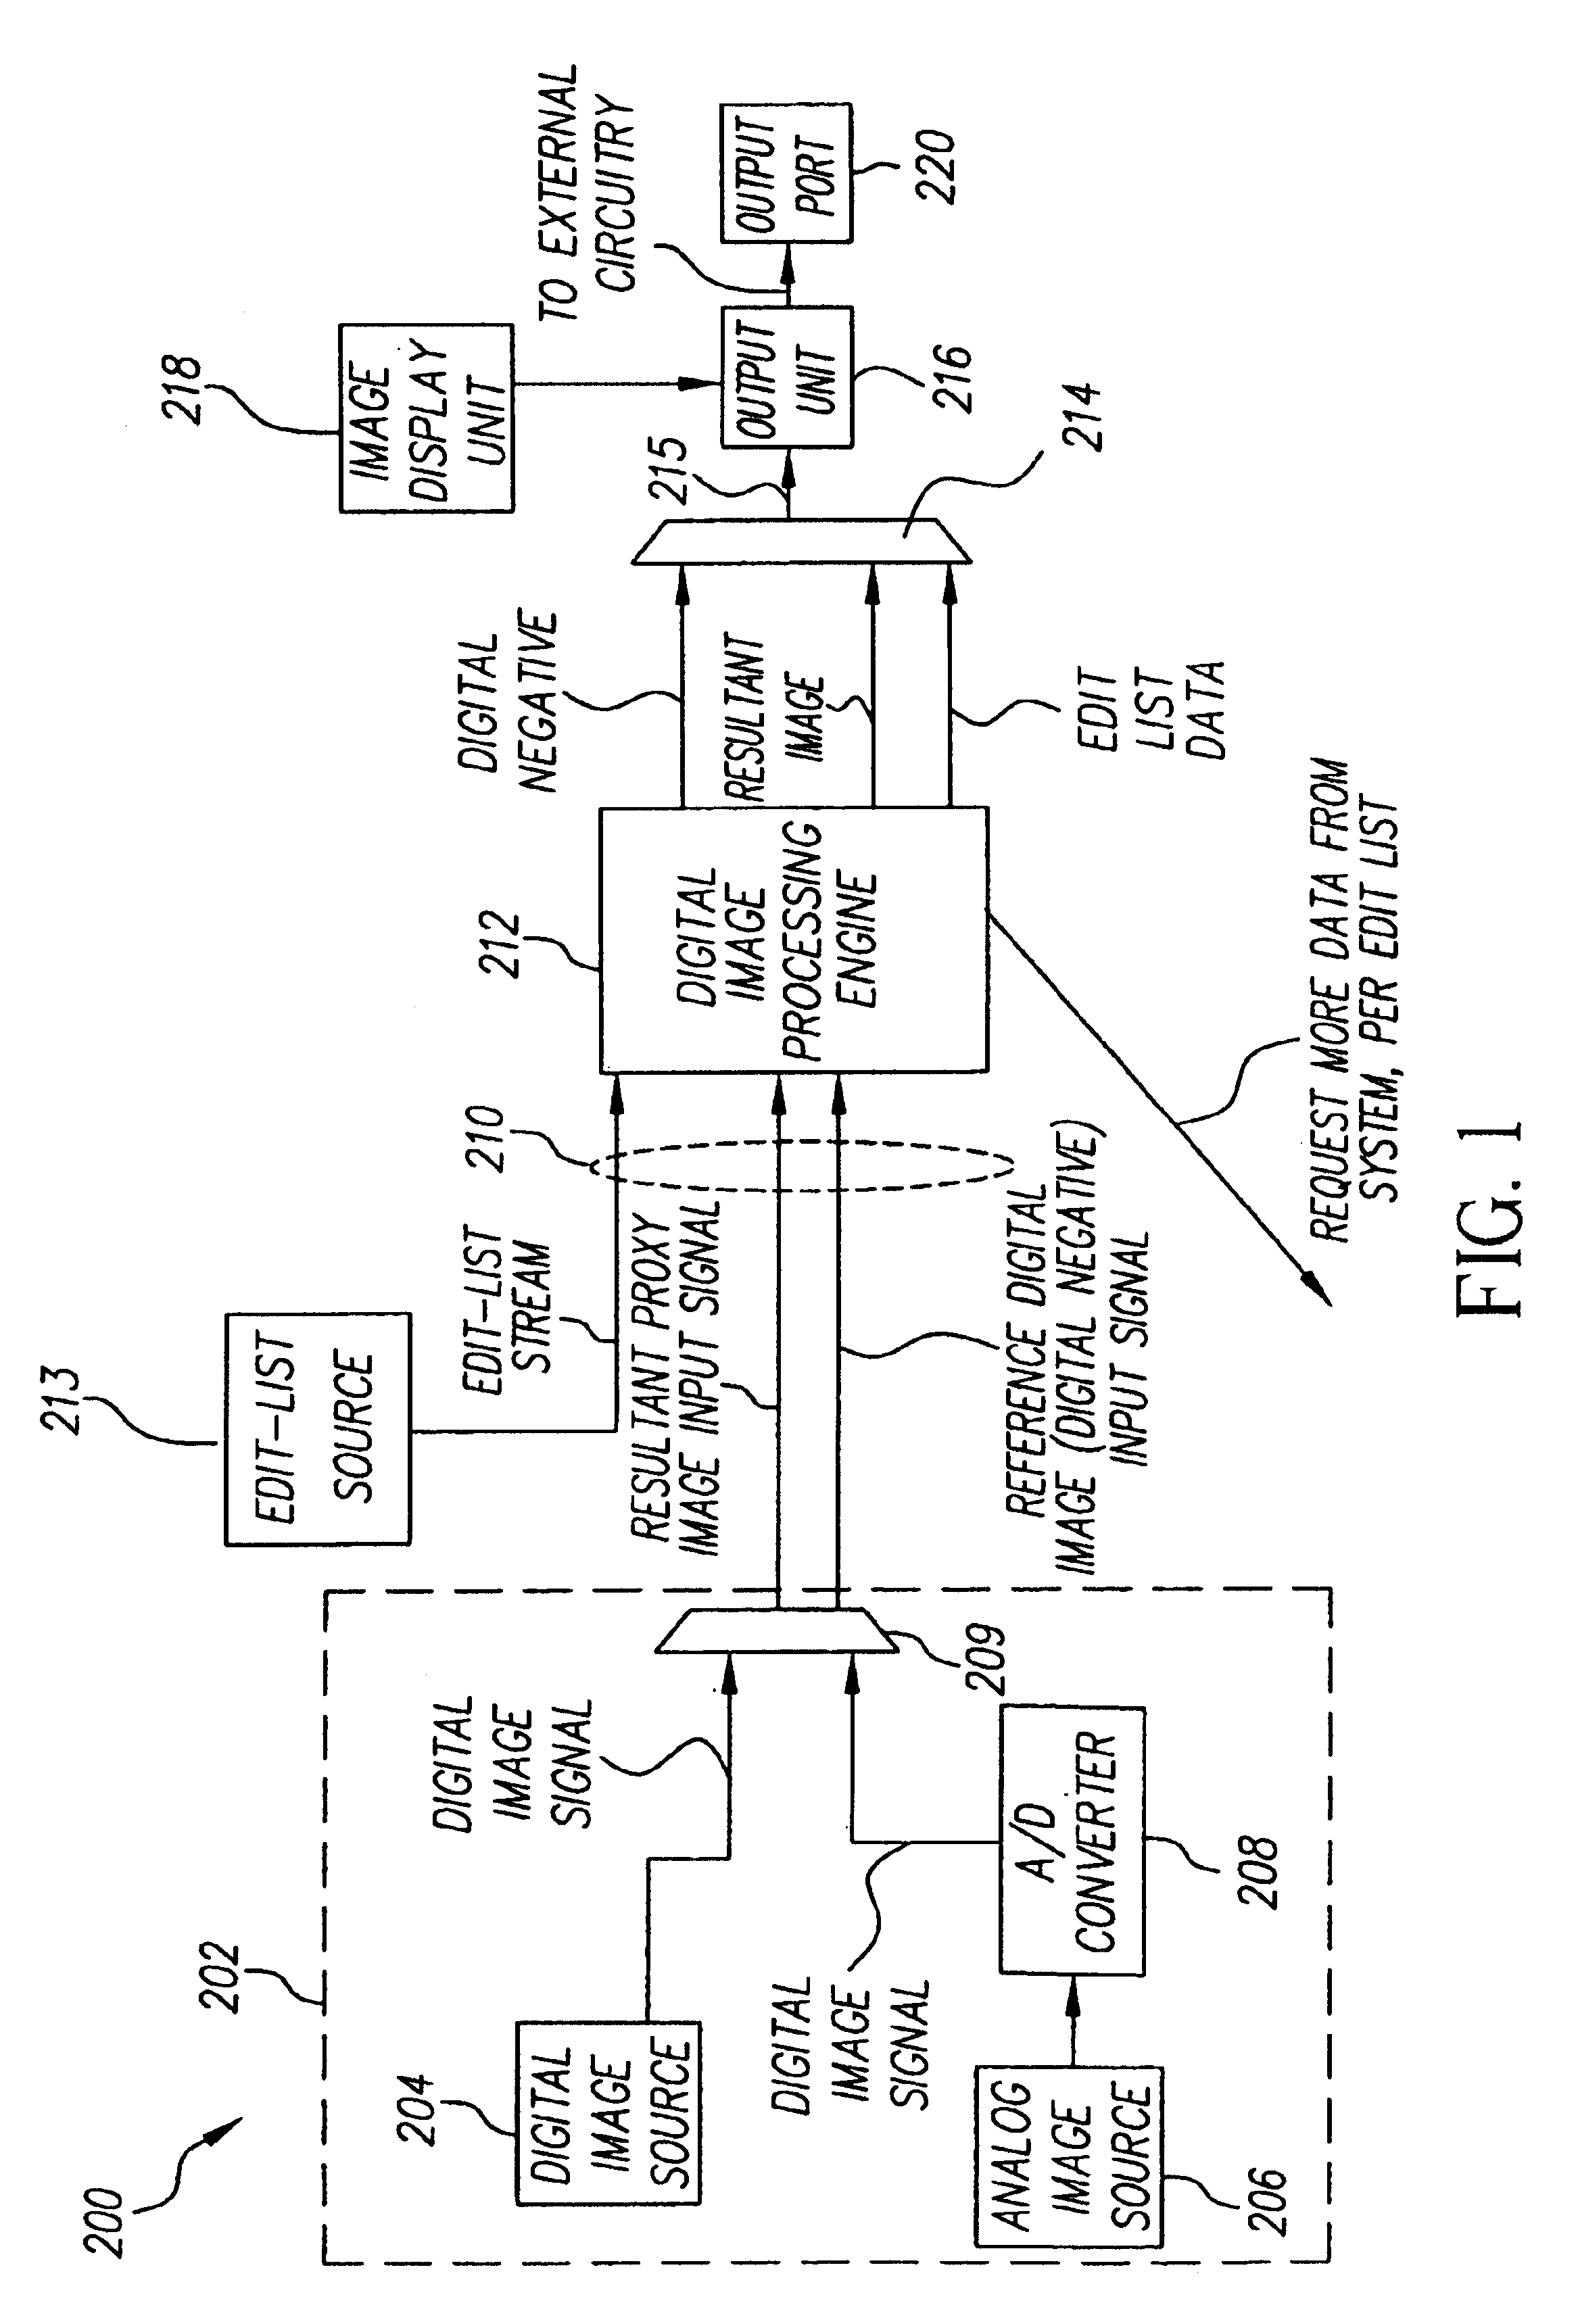 Method and apparatus that allows a low-resolution digital greeting card image or digital calendar image to contain a link to an associated original digital negative and edit list